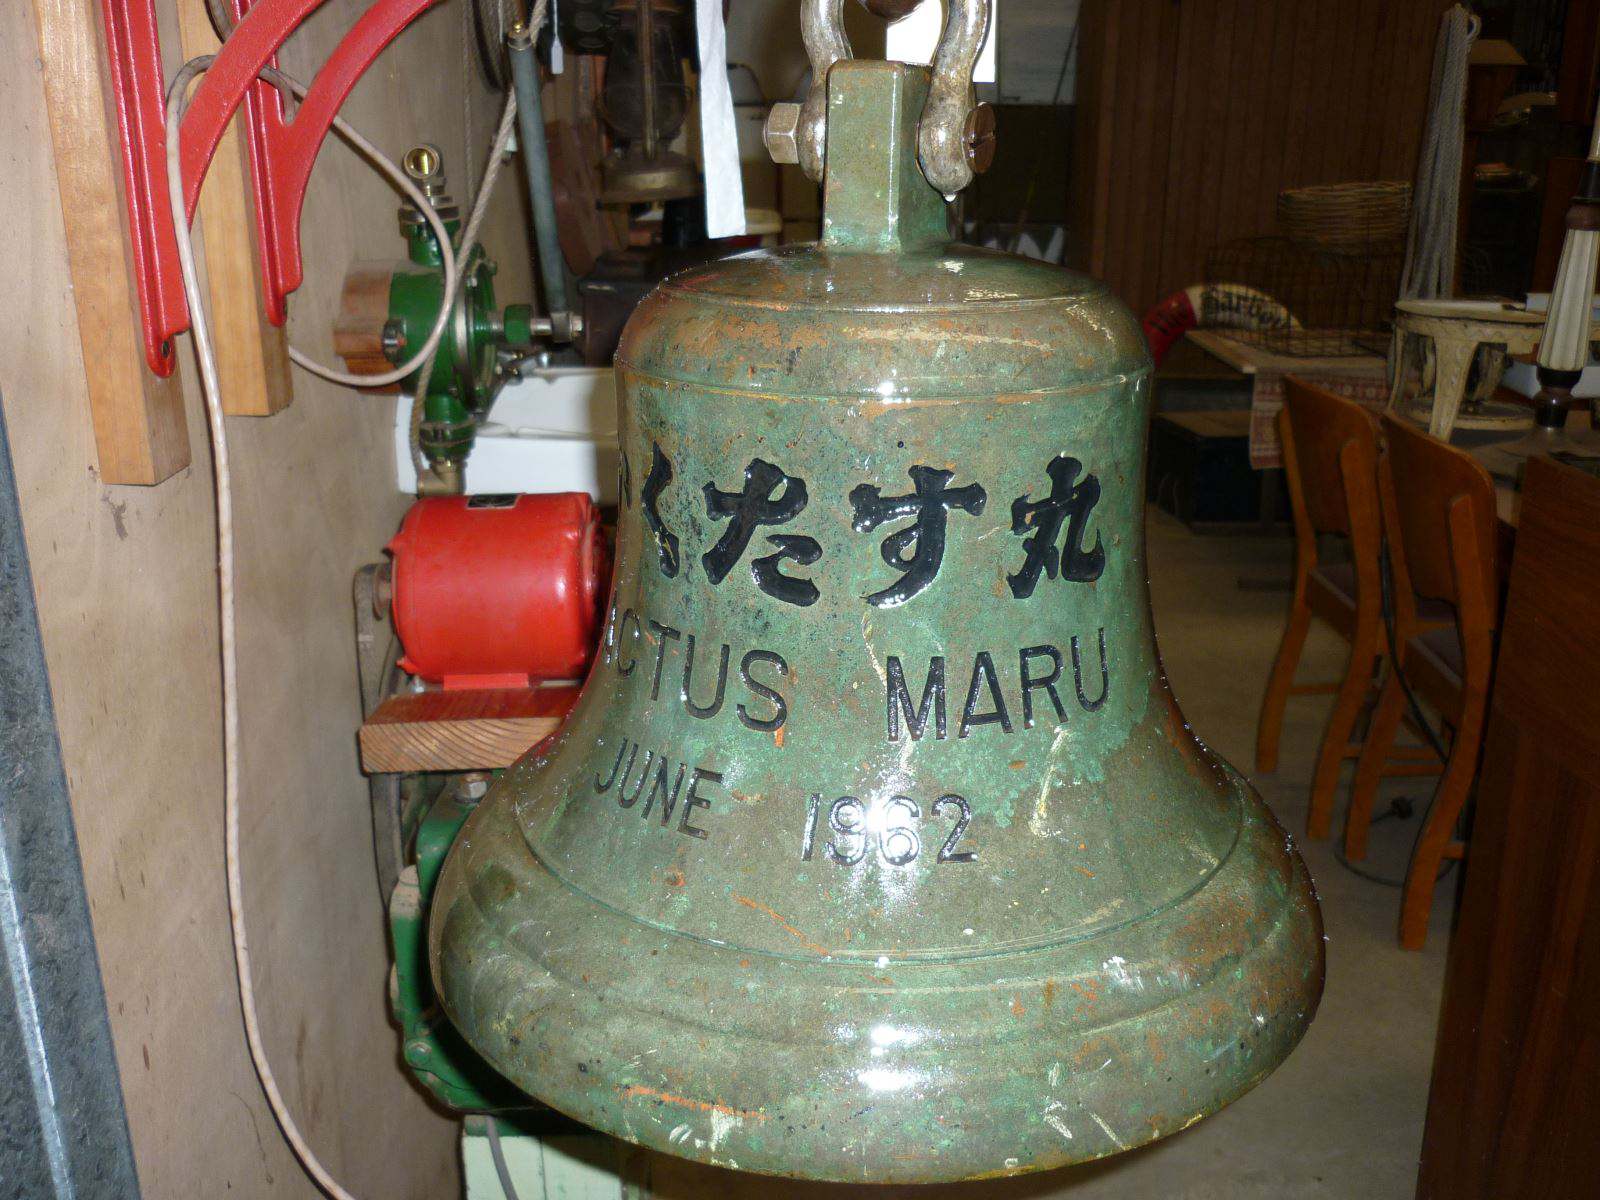 Ships Bell. A large Japanese Bell. The “CACTUS MARU” June 1962